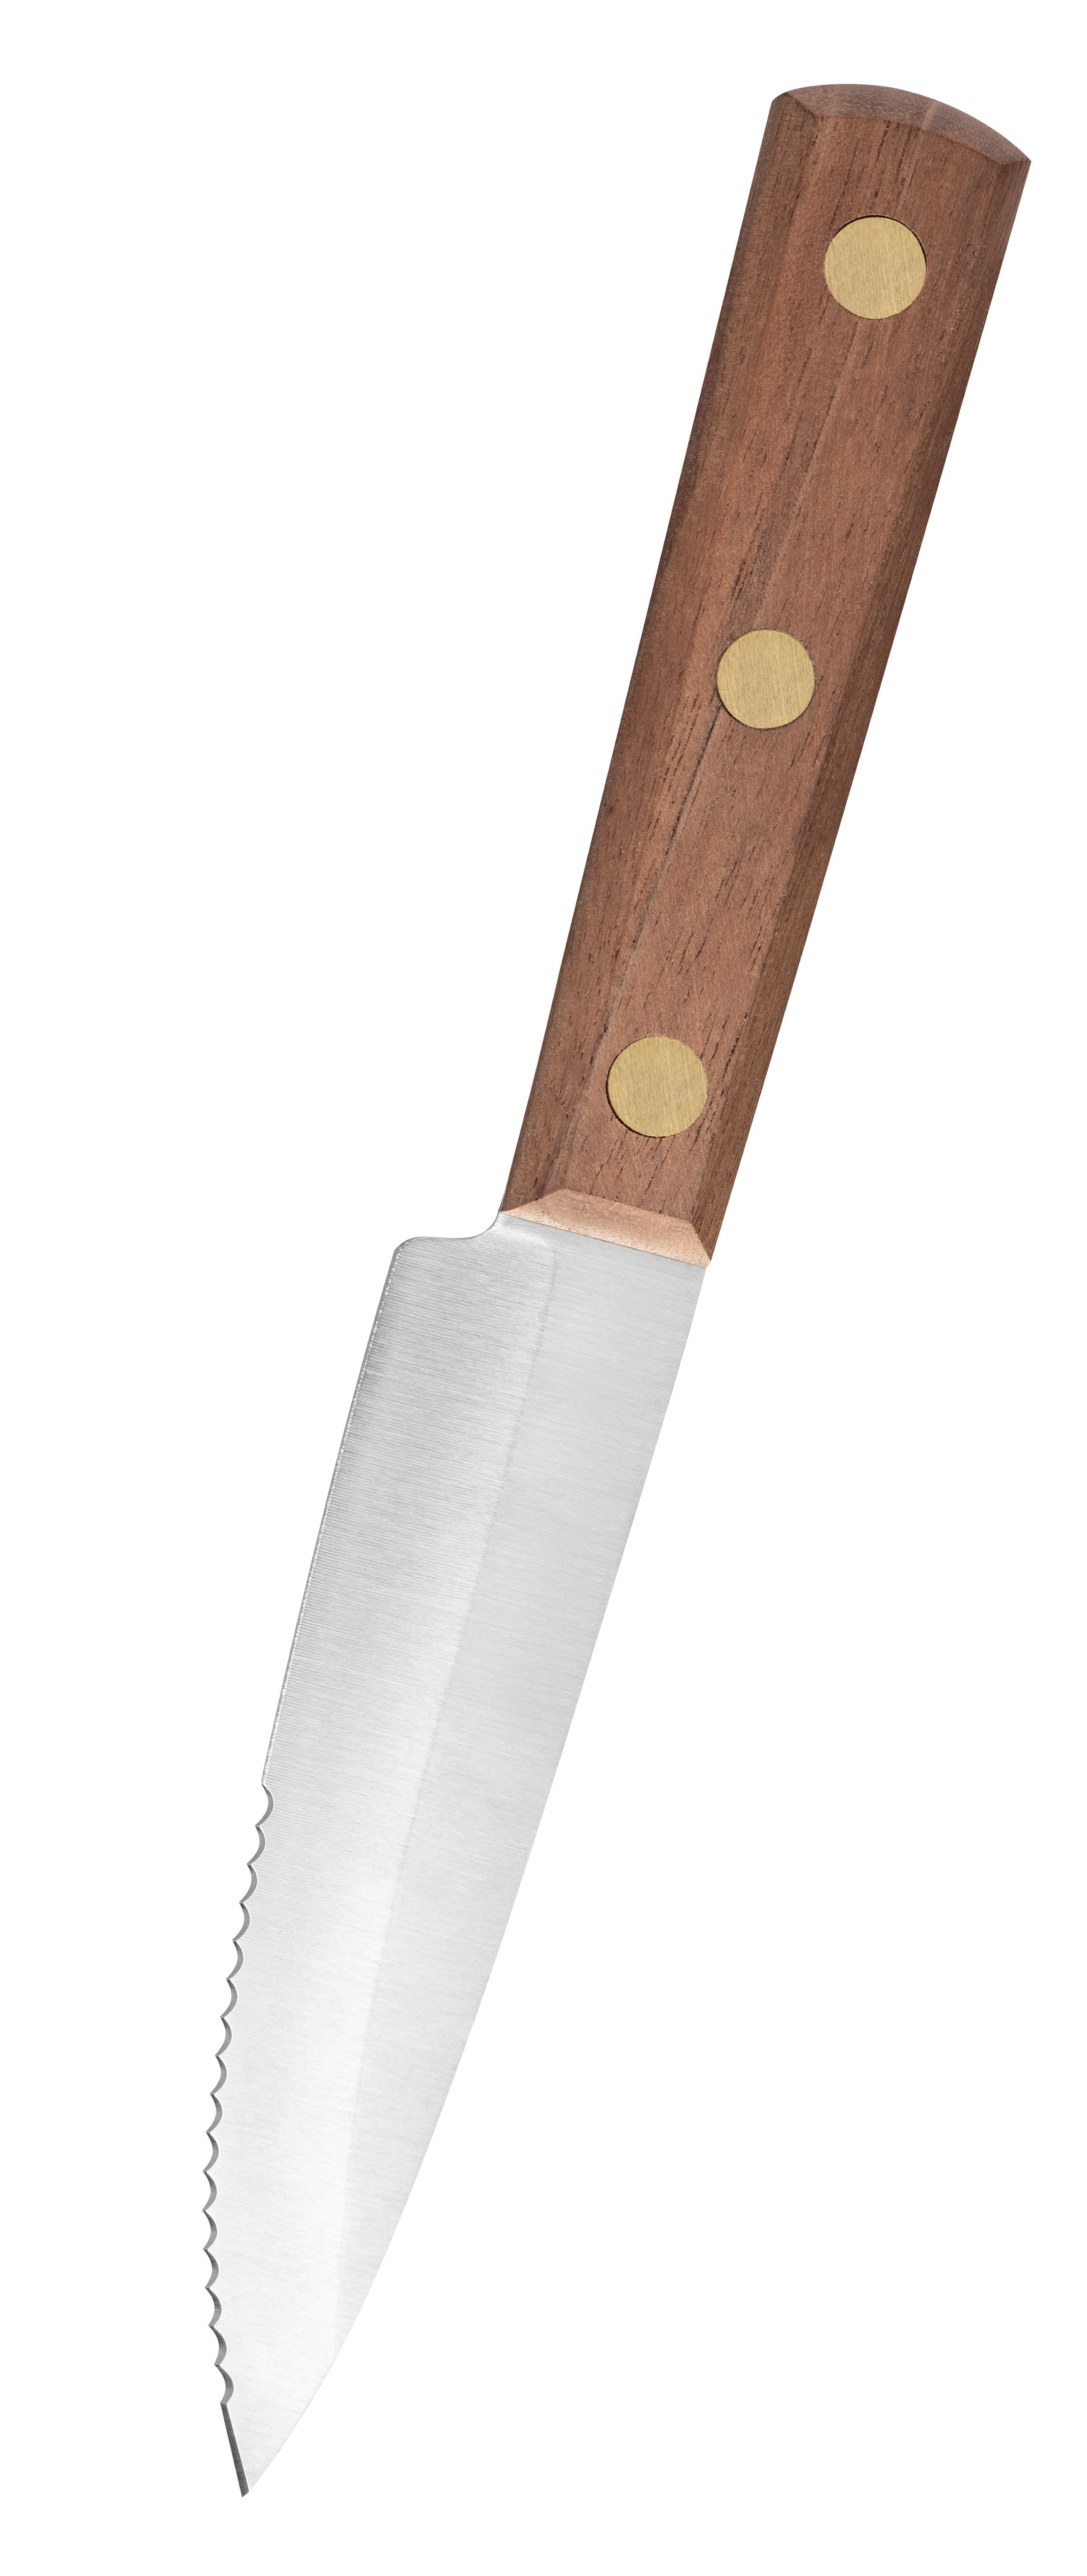 OAKSWARE Steak Knives Set of 8 with Walnut Block 5 inch Non